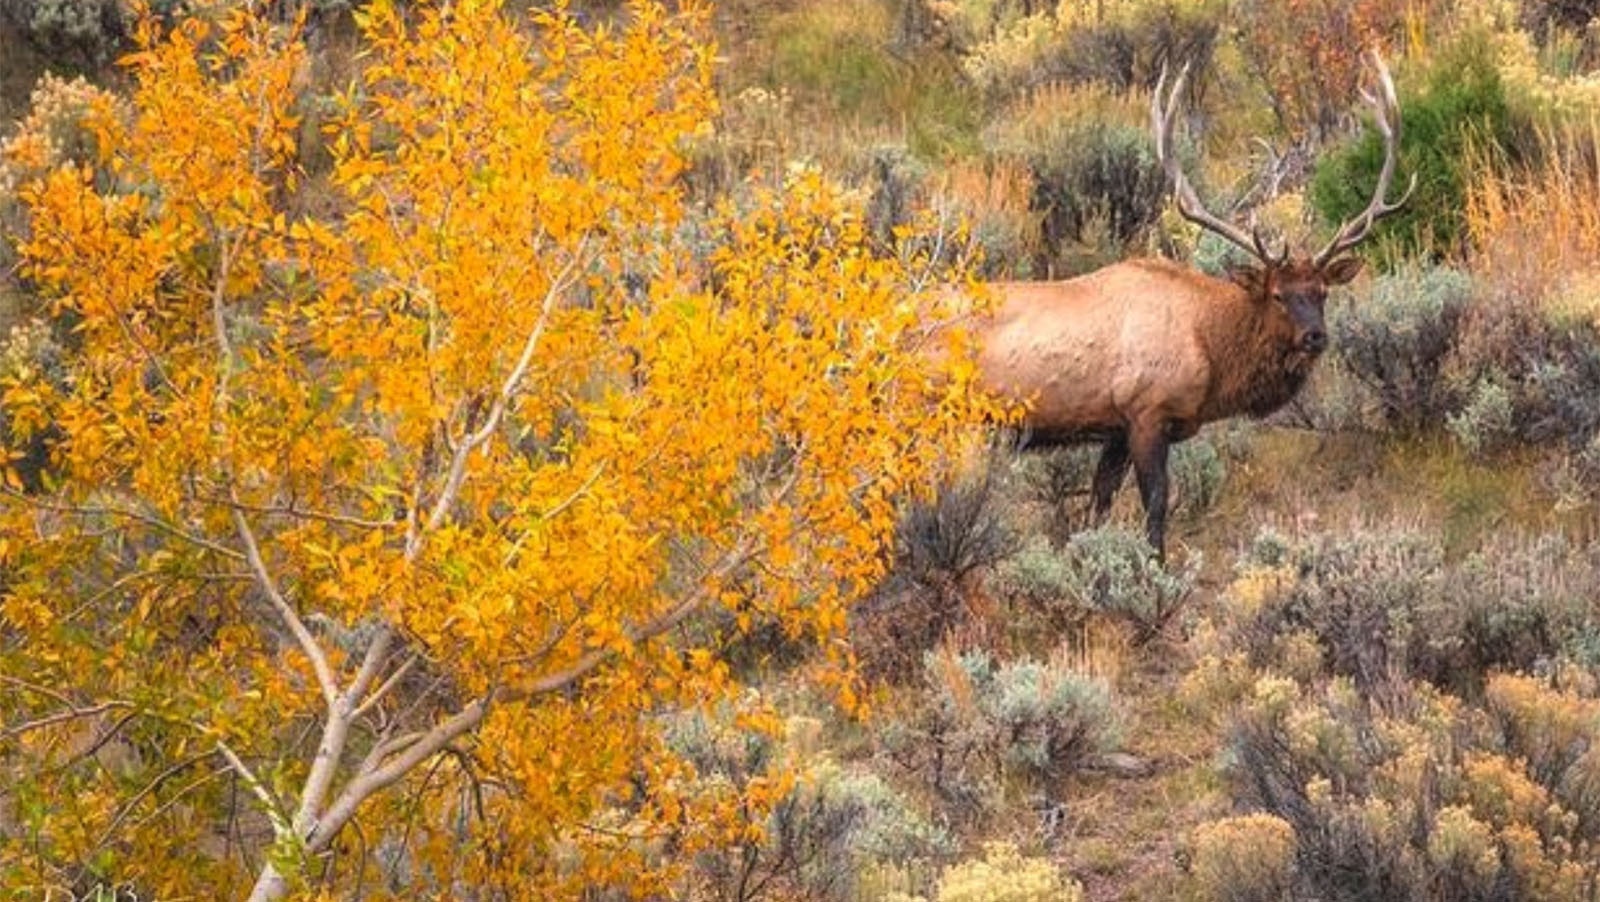 Wyoming photographer Dave Bell snapped this stunning photo of an elk surrounded by fall colors in Wyoming's backcountry.